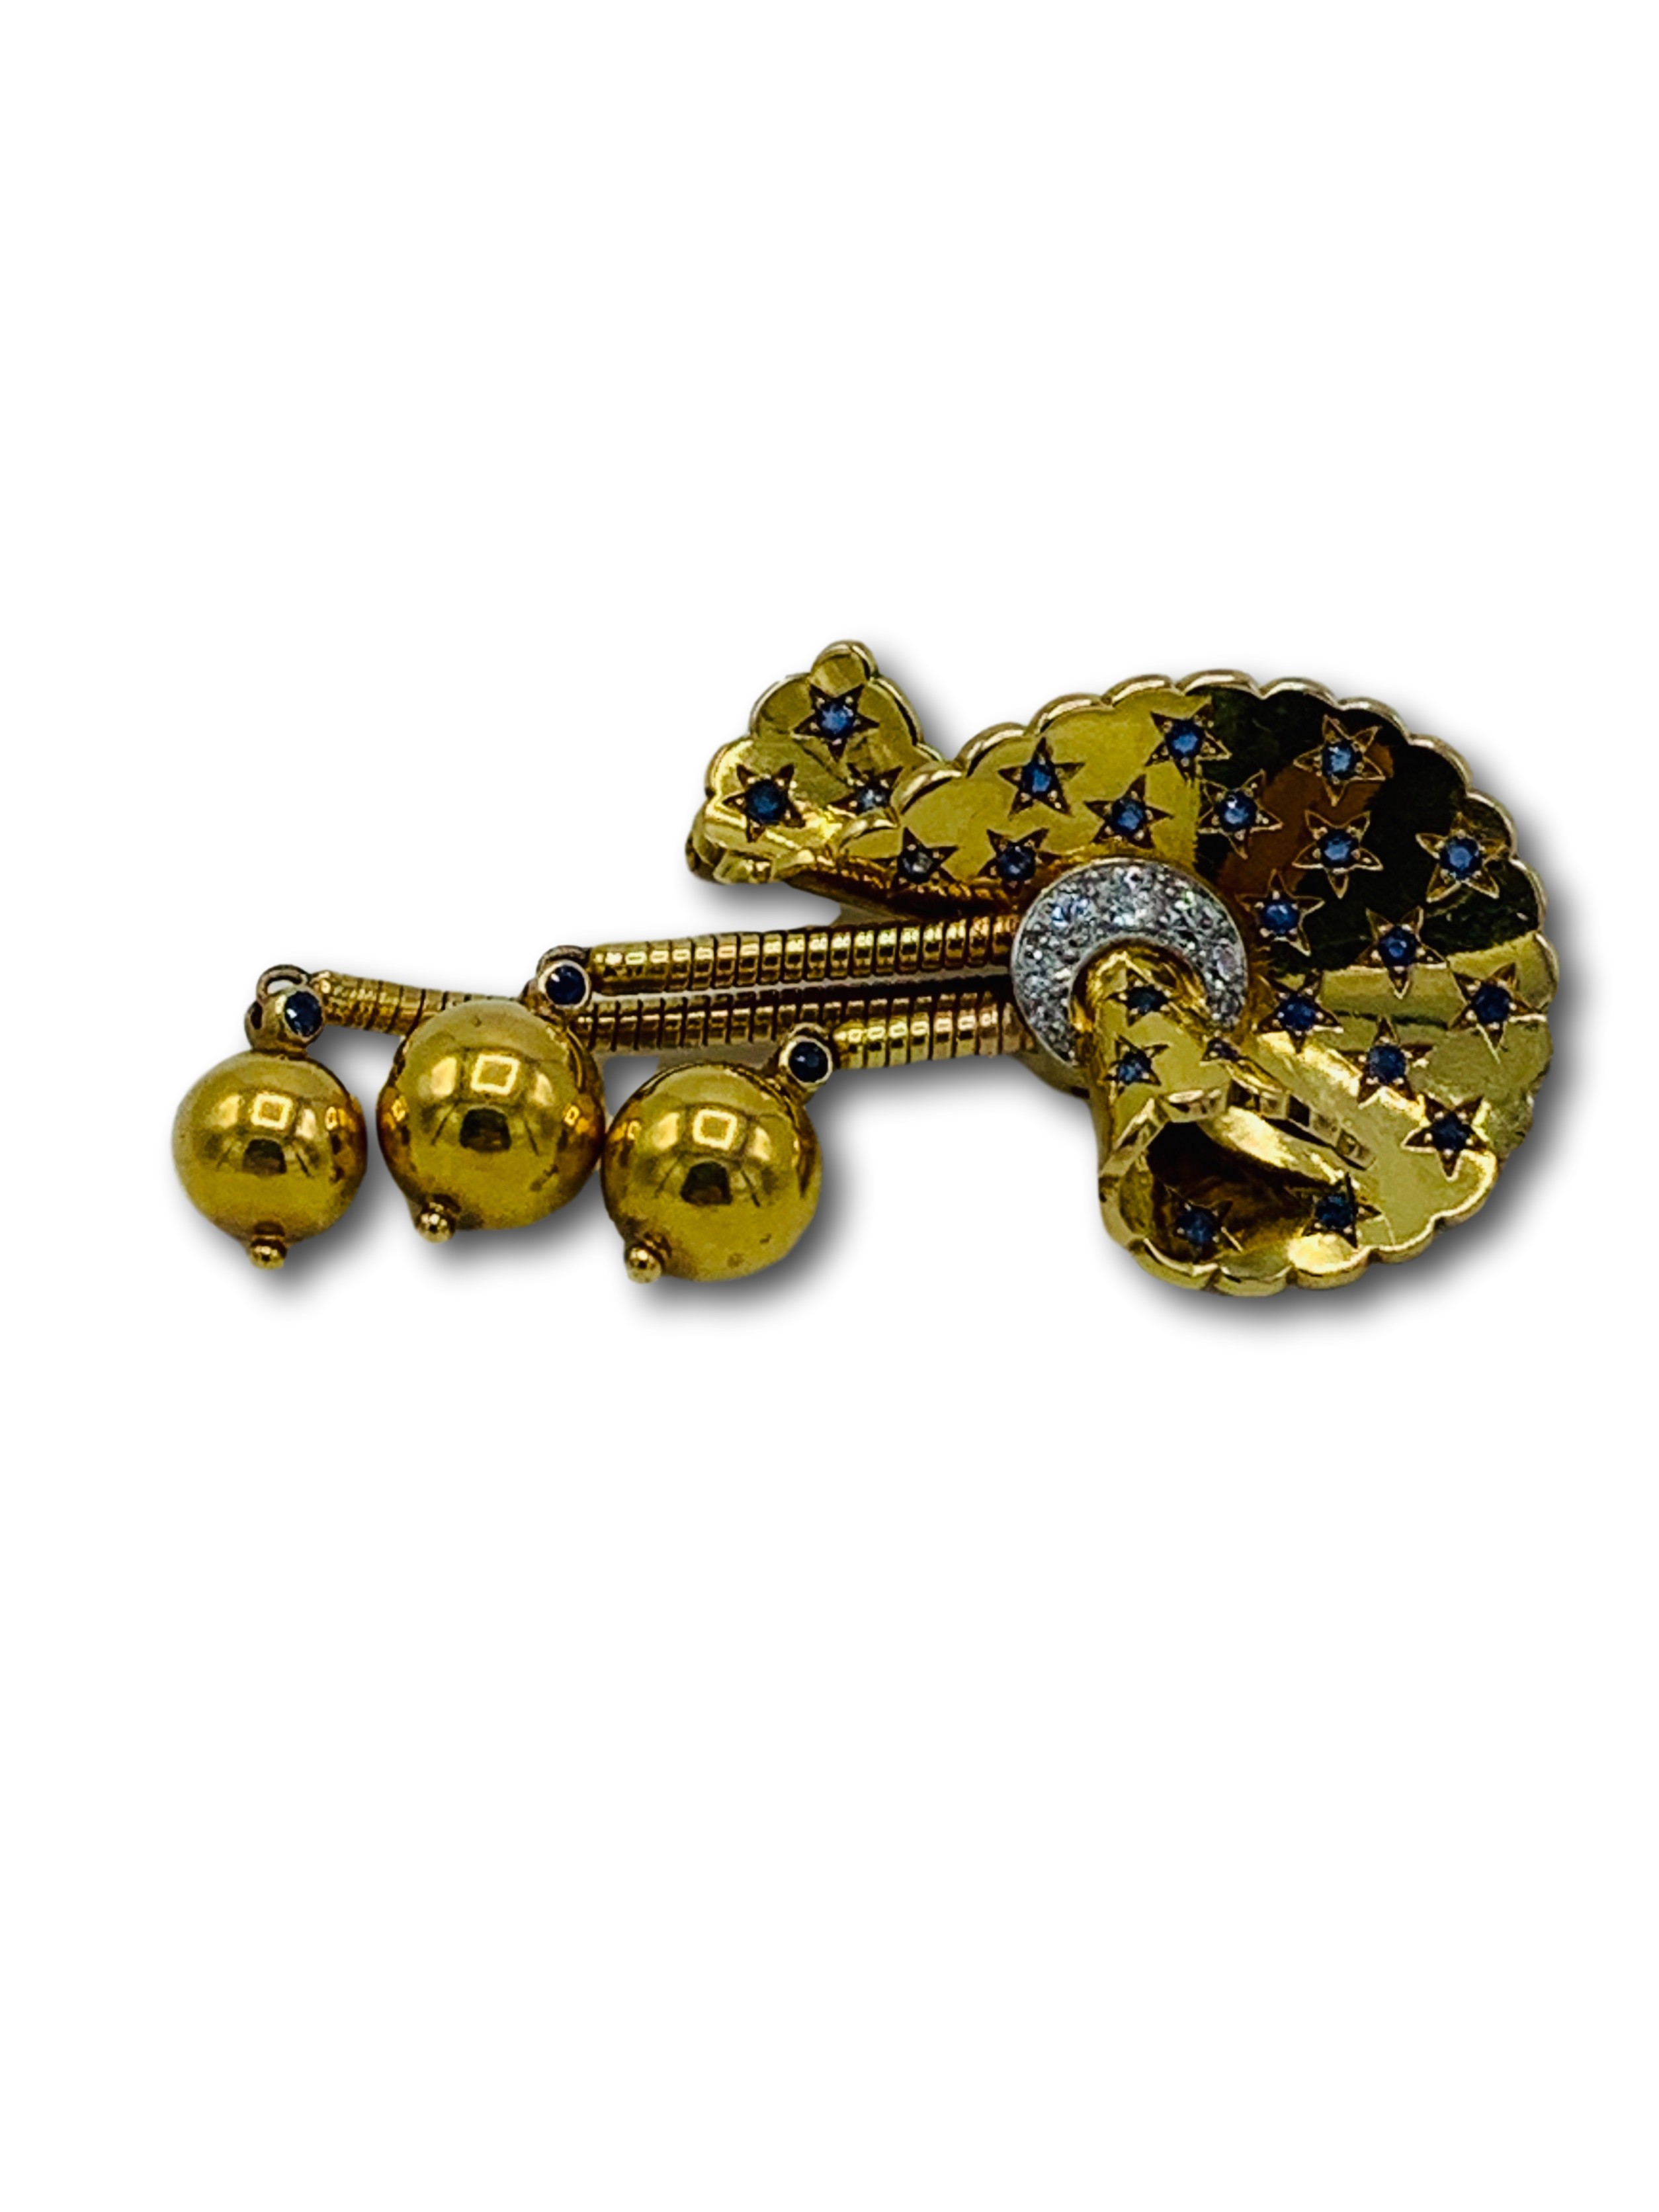 French 18k gold, sapphire and diamond Ball pin.